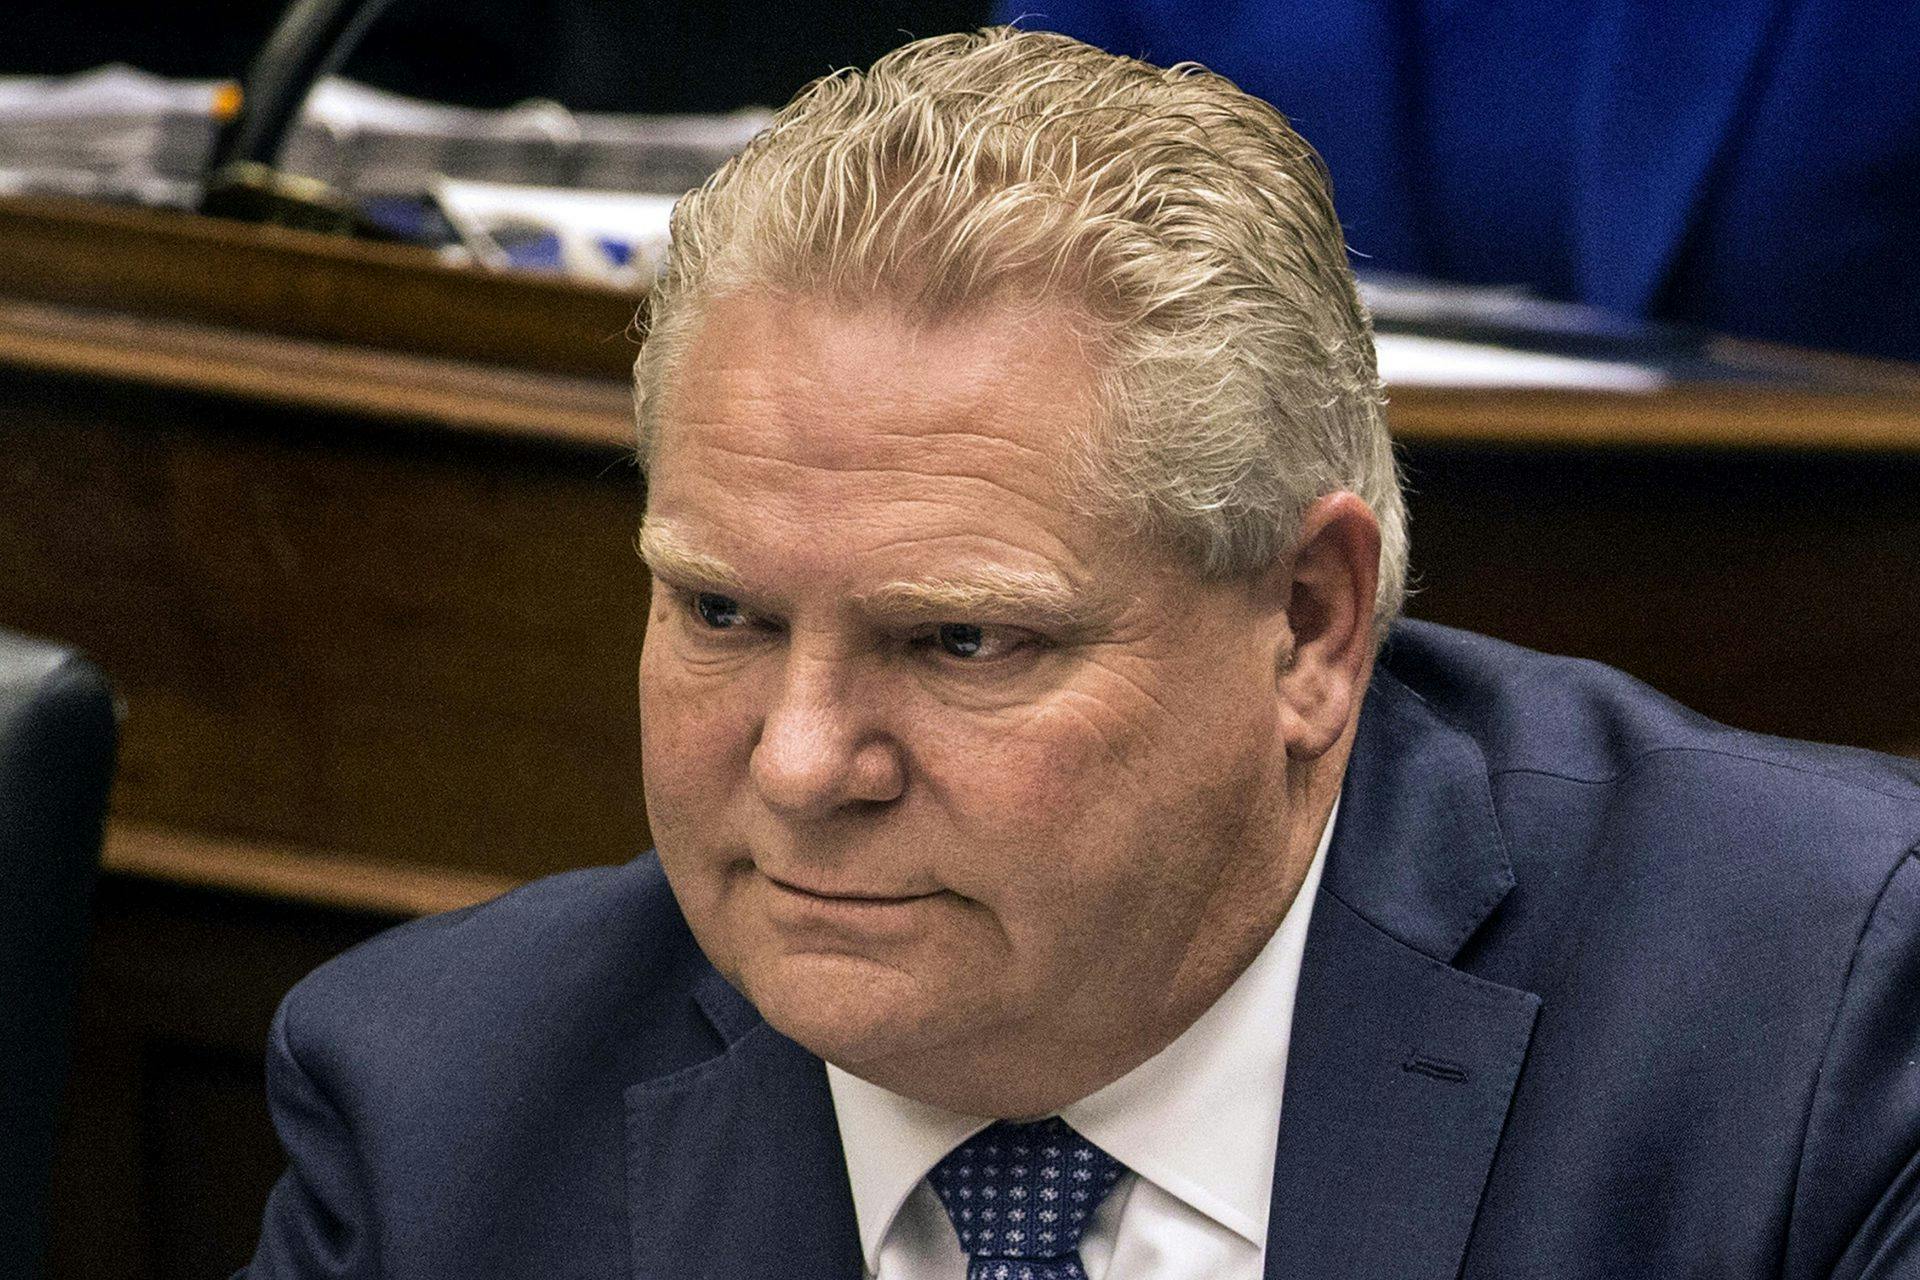 6 in 10 Ontarians feel the government is on the wrong track, says poll